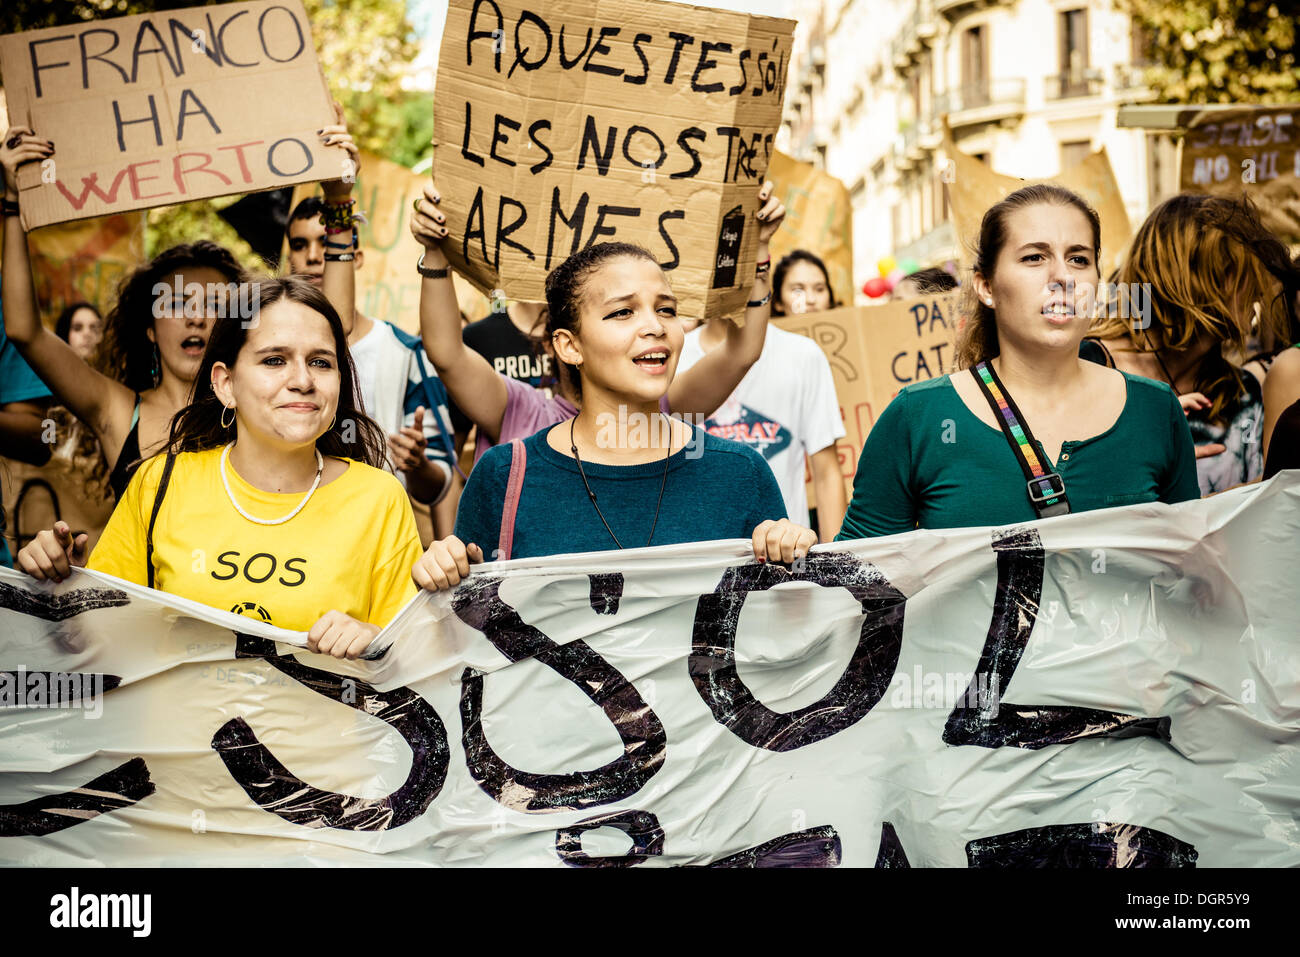 Barcelona, Spain. October 24th, 2013: Students behind their banner protest against austerity measures and the 'law Wert' during a three day long education strike in Barcelona. © matthi/Alamy Live News Stock Photo